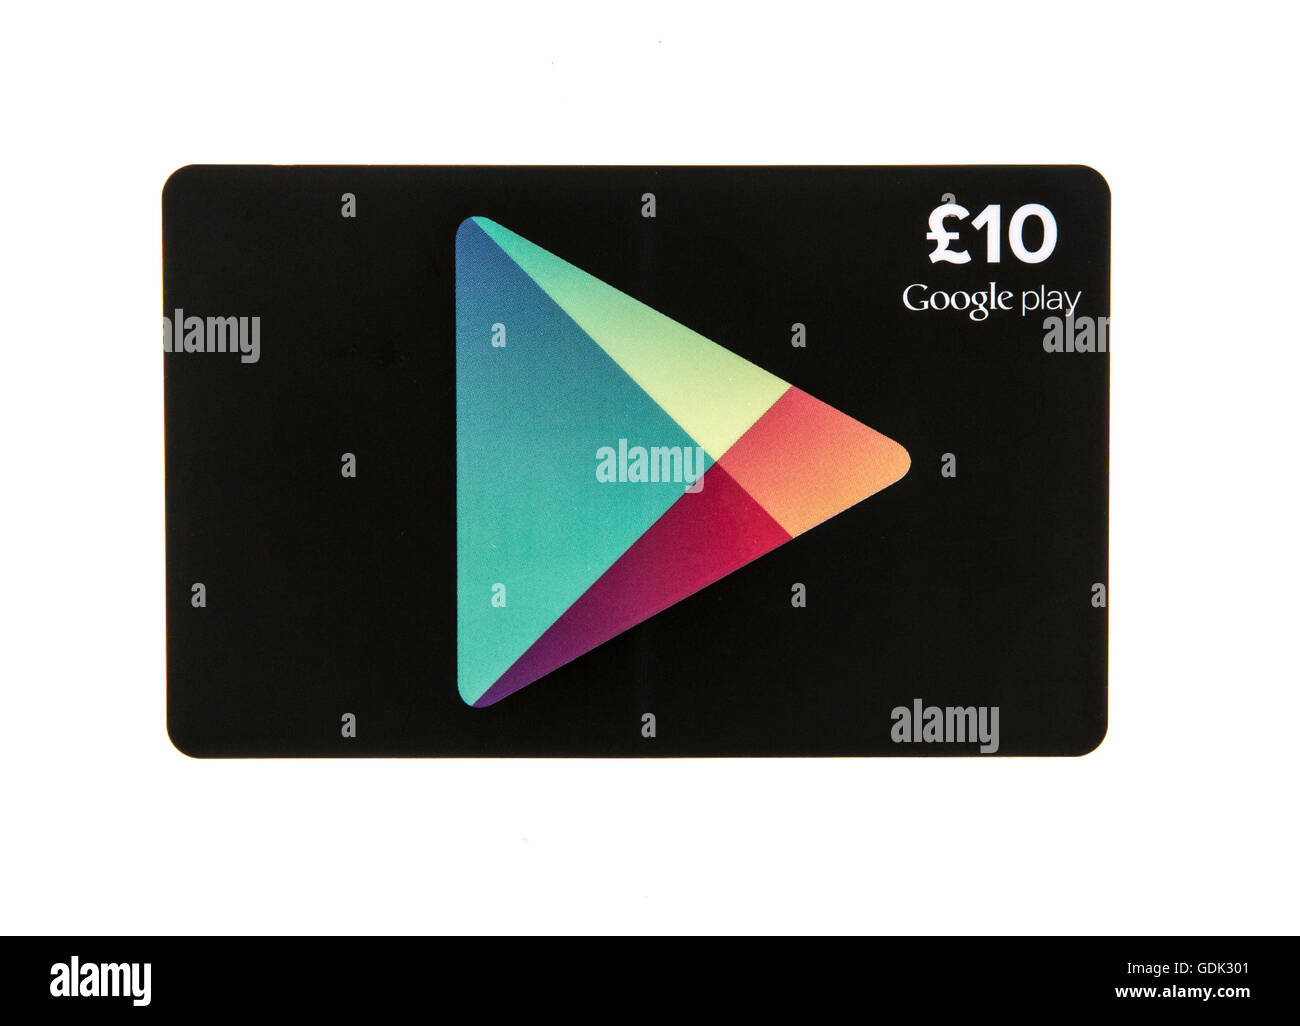 Google Play Card Stock Photos and Pictures - 377 Images